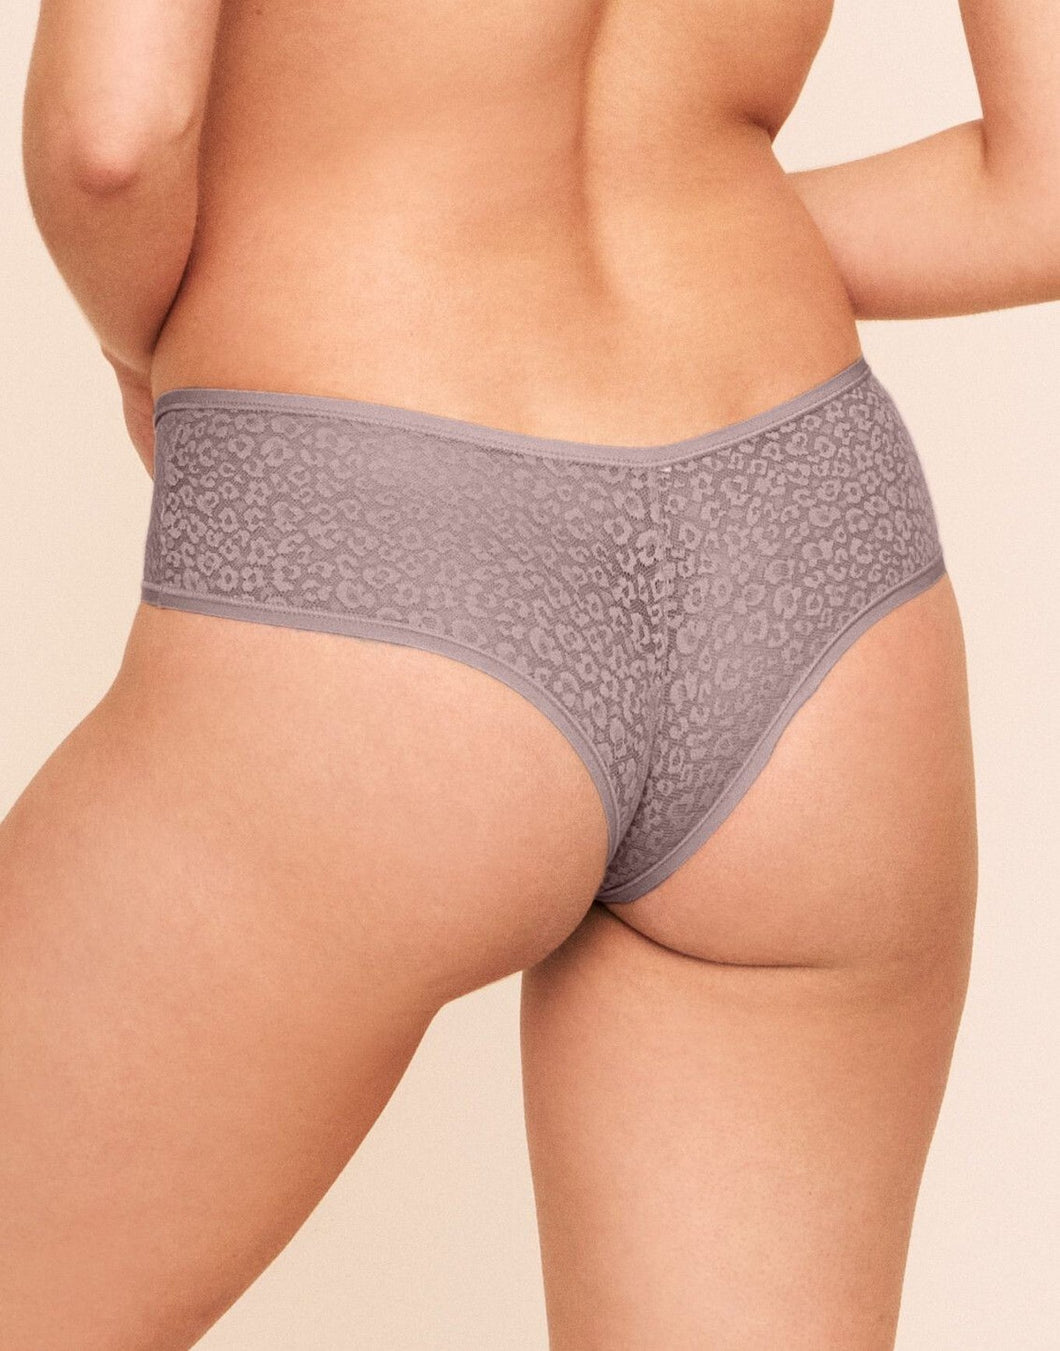 Earth Republic Billie Lace Lace Cheeky in color Deauville Mauve and shape cheeky